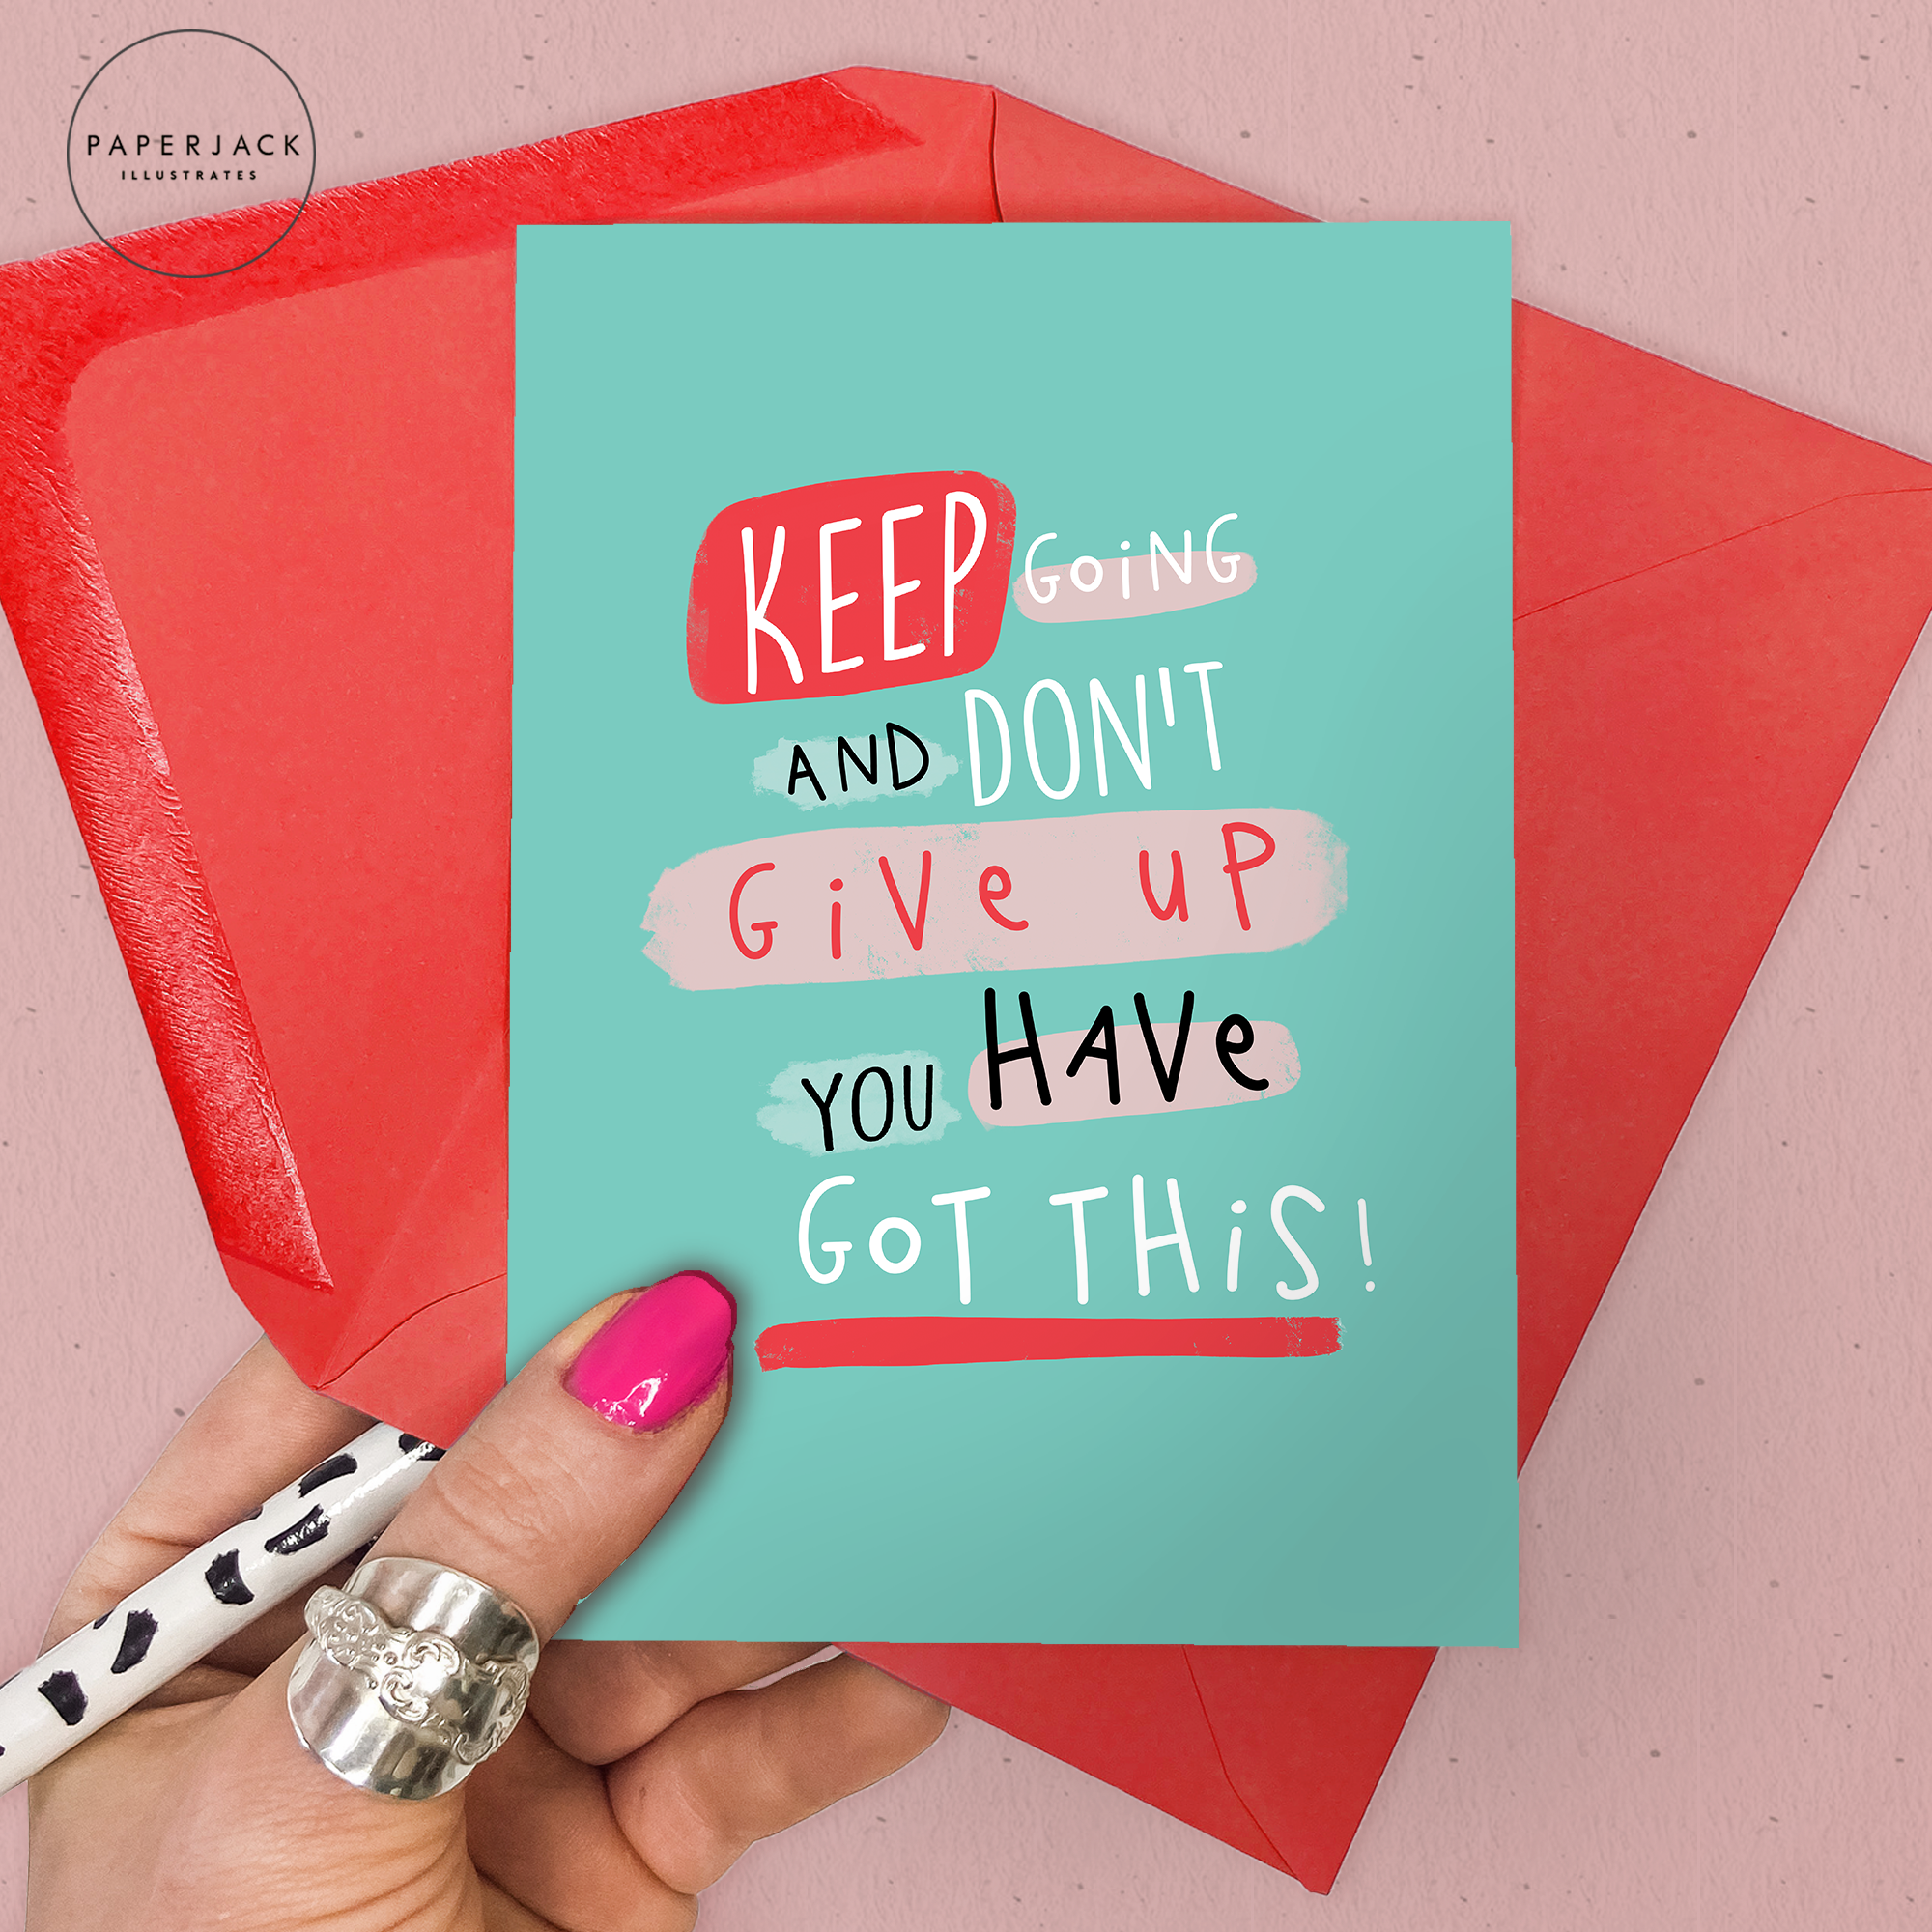 Keep going and don't give up - greeting card